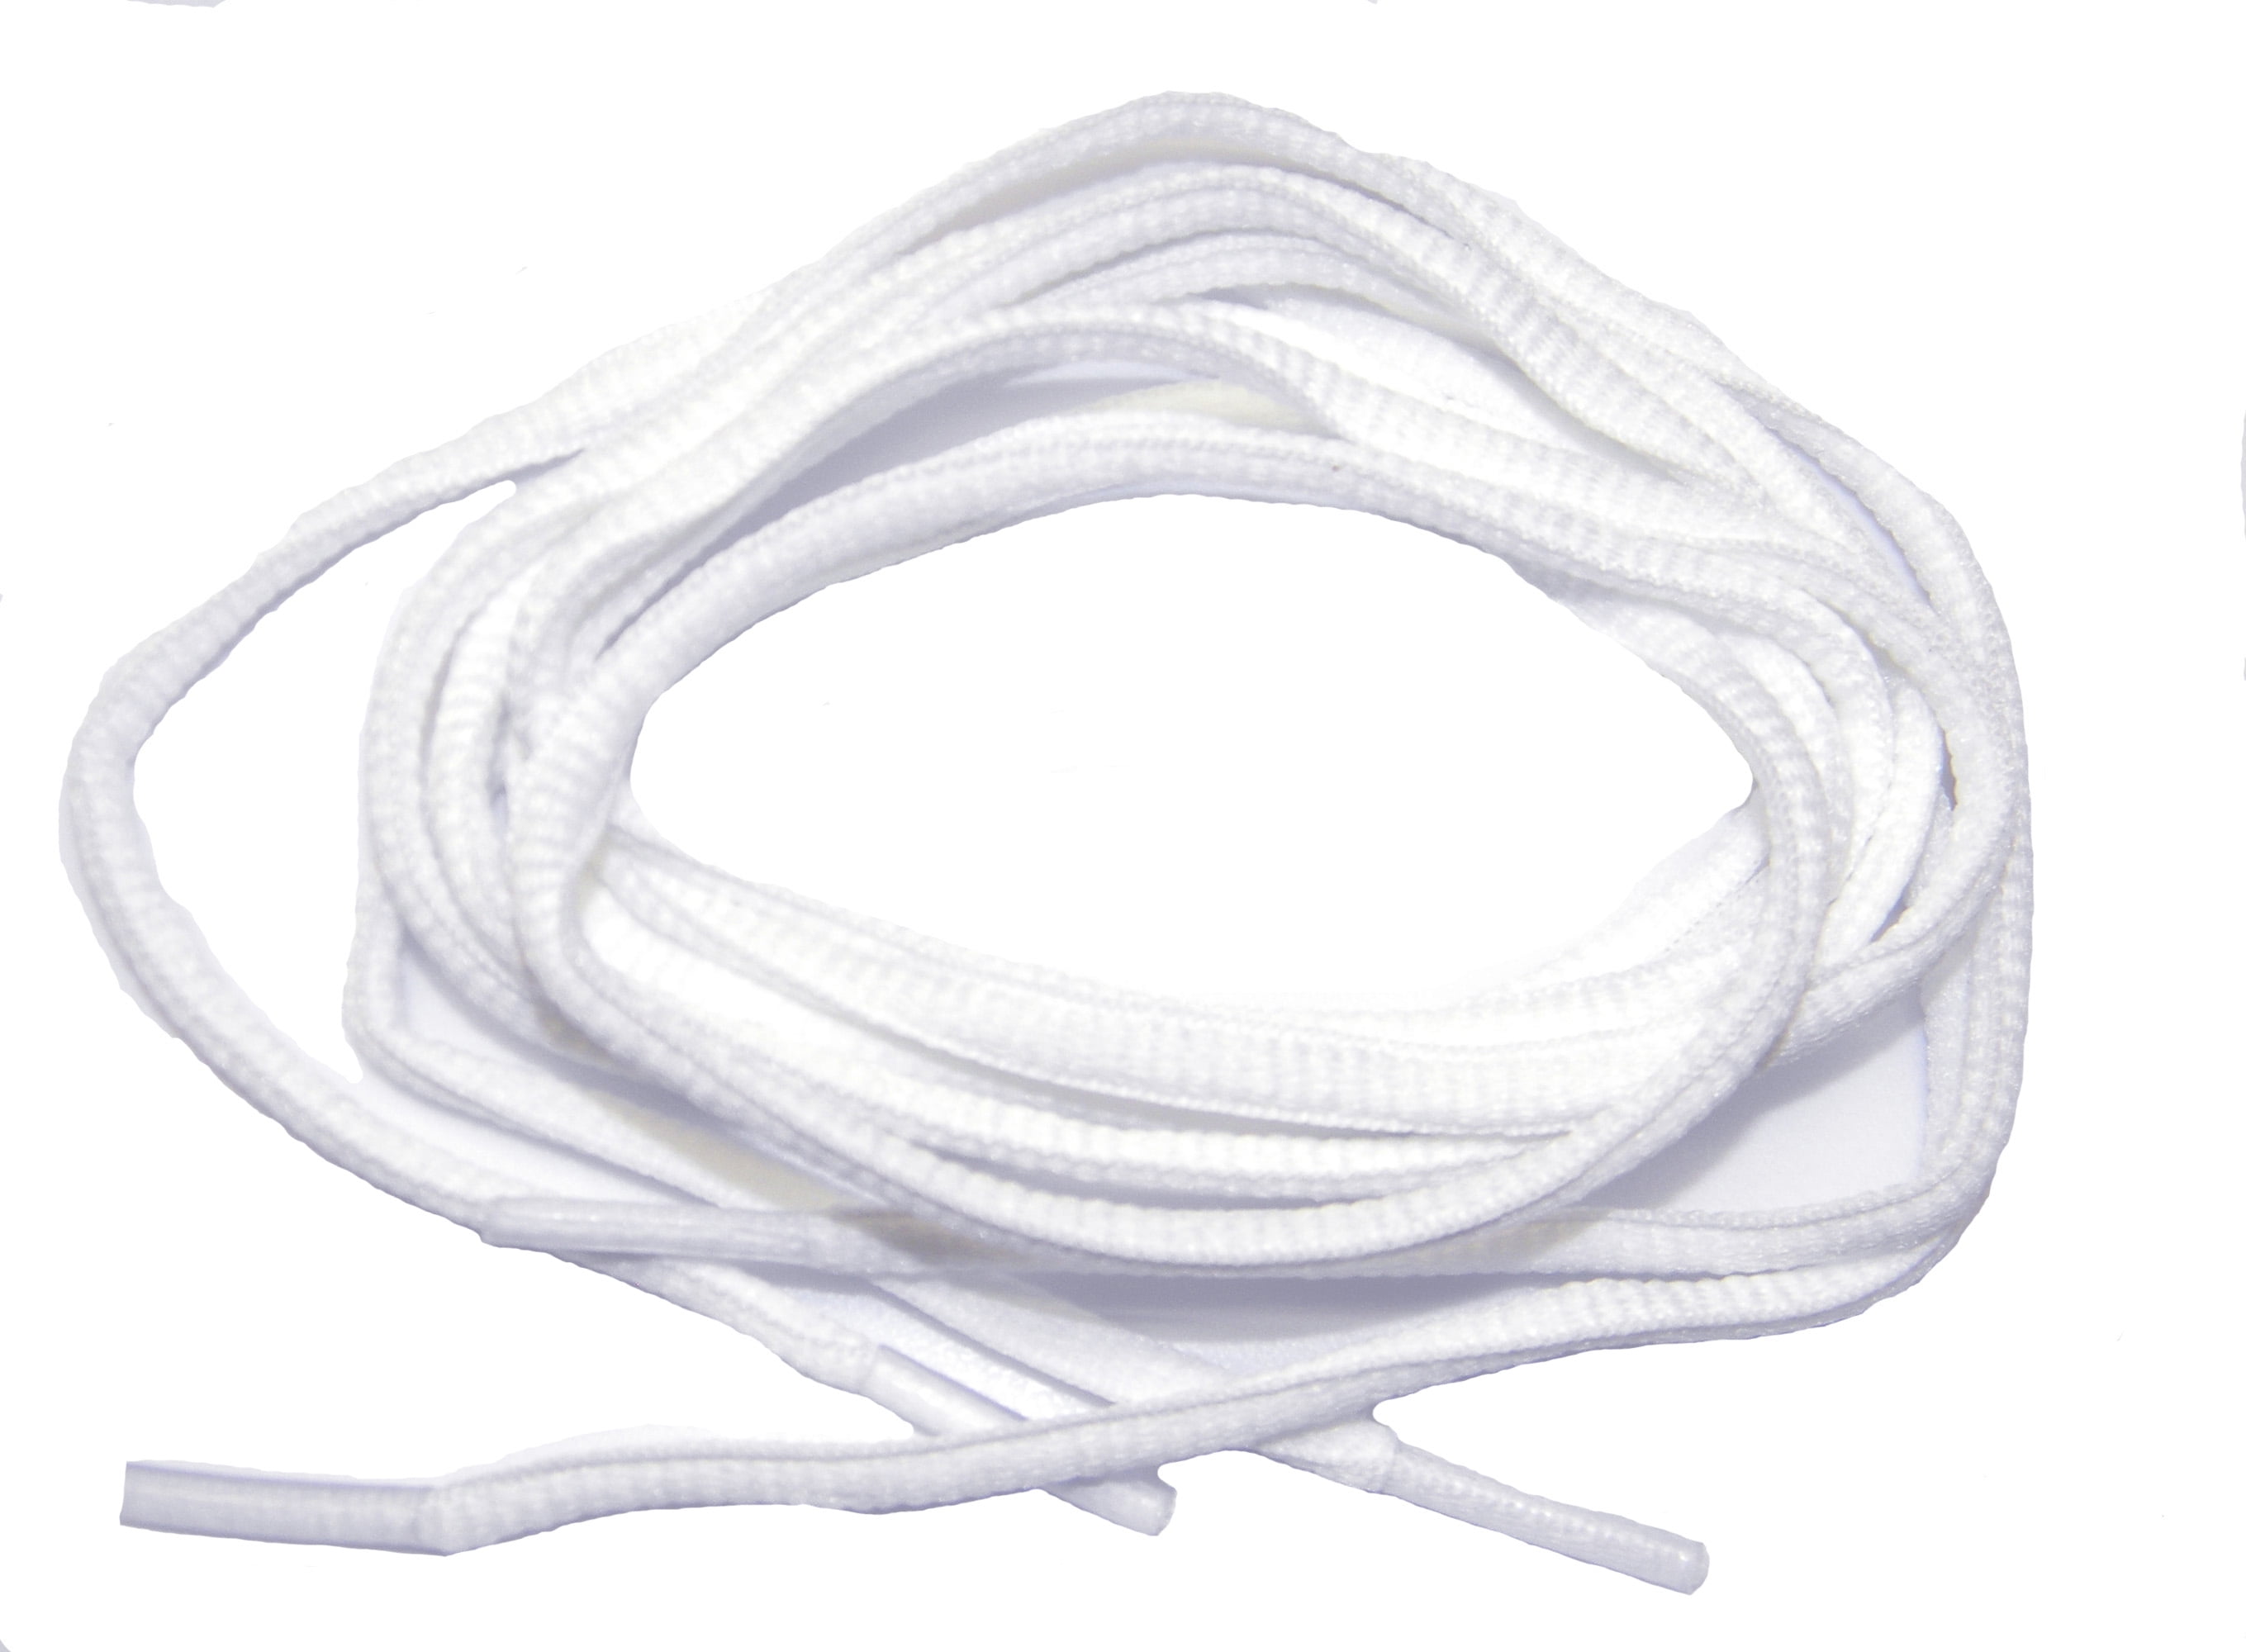 Fabrication Enterprises Elastic Shoe Laces with Cord-Lock, White - 2 count